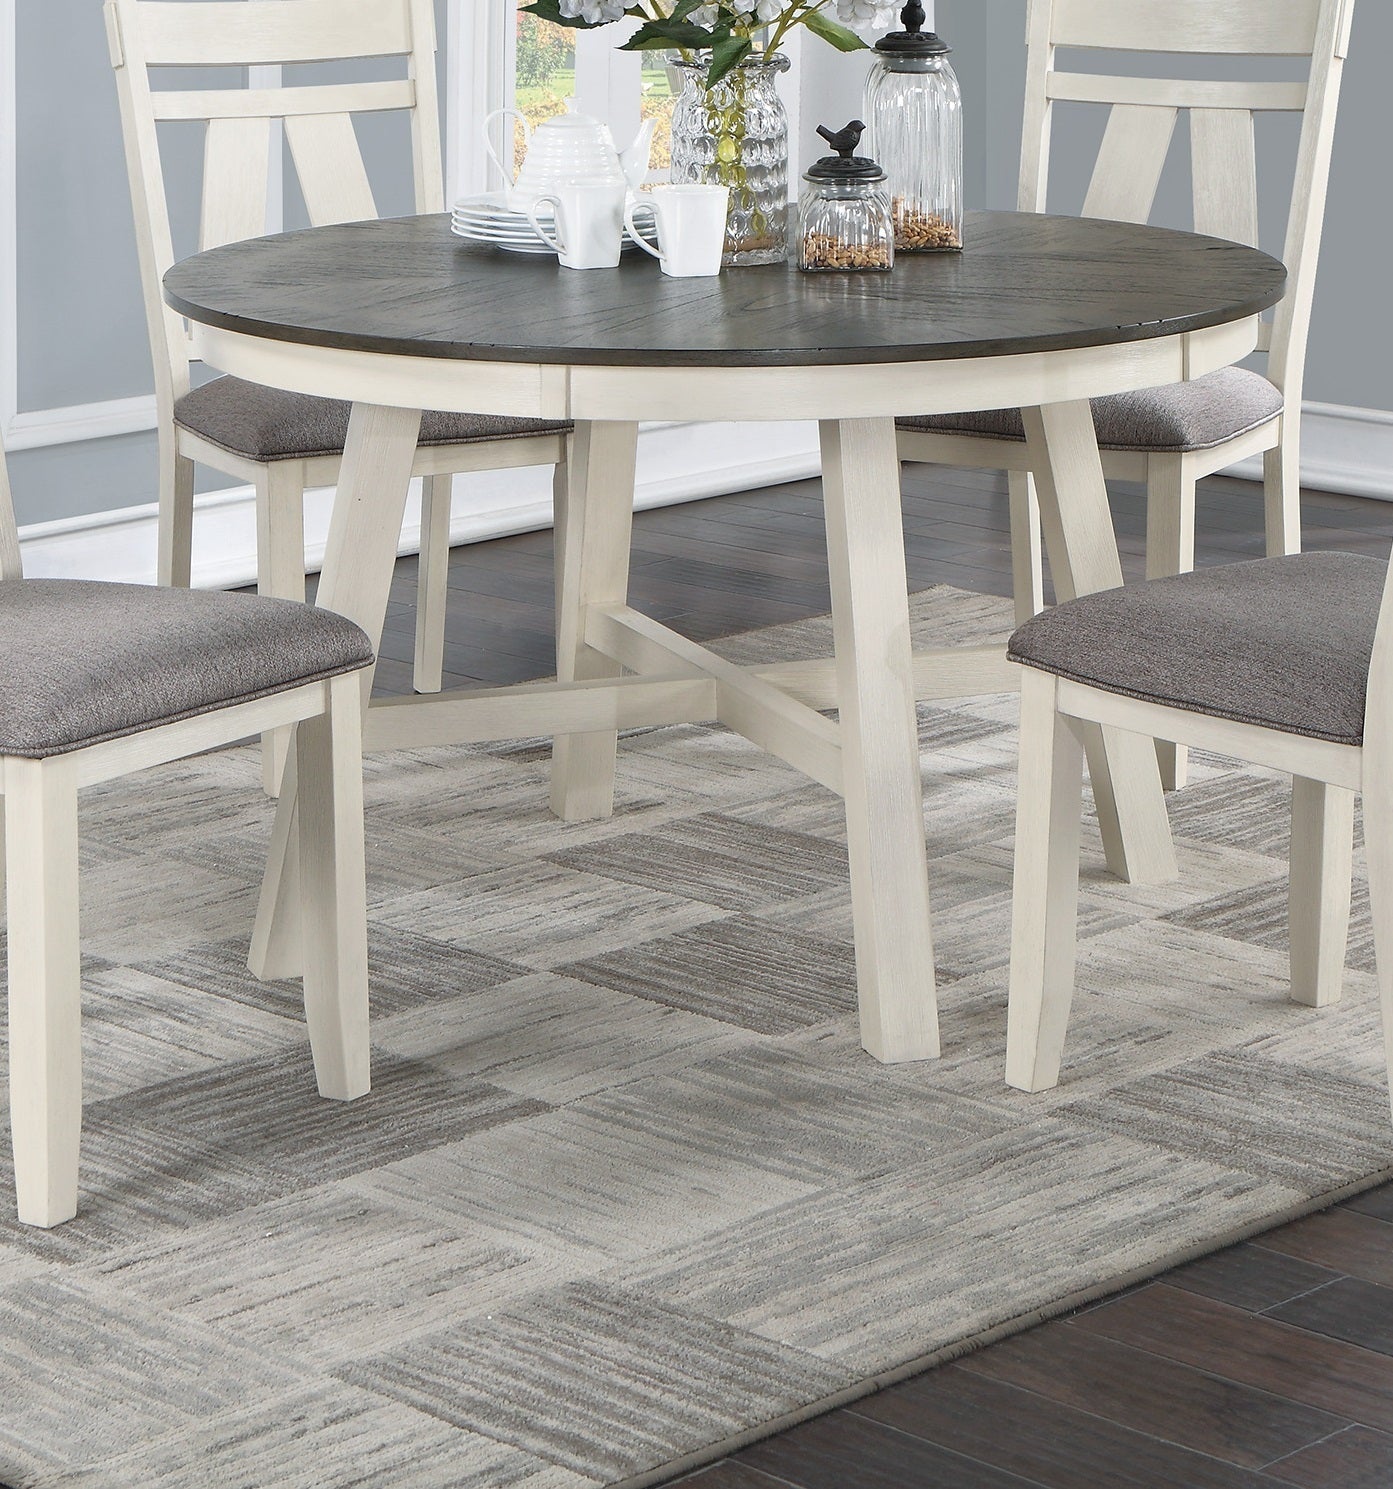 Dining Room Furniture 5pc Dining Set Round Table And 4x Side Chairs Gray Fabric Cushion Seat White Clean Lines Wooden Table Top